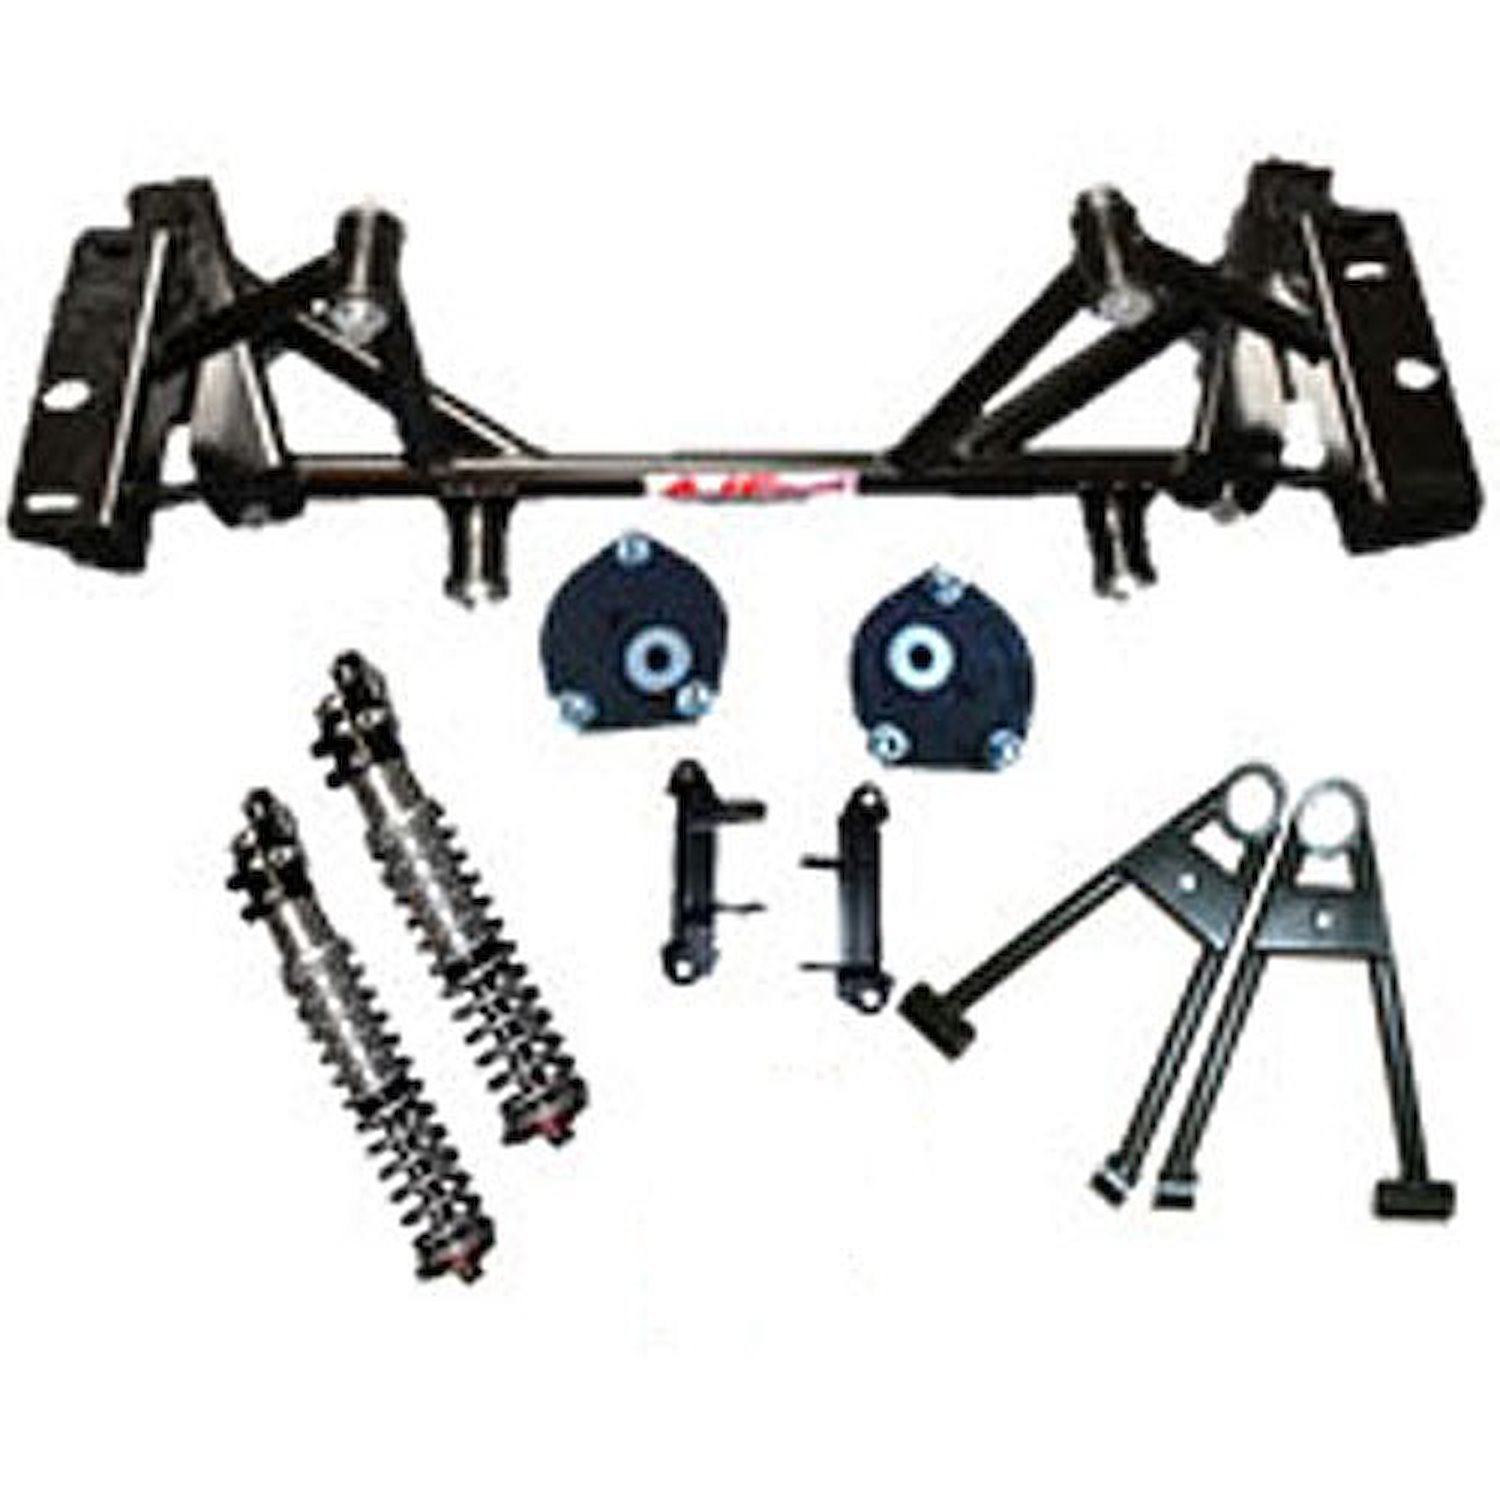 COLT-651200 Front Suspension Kit for 1964-1970 Ford Mustang w/ Small Block Ford